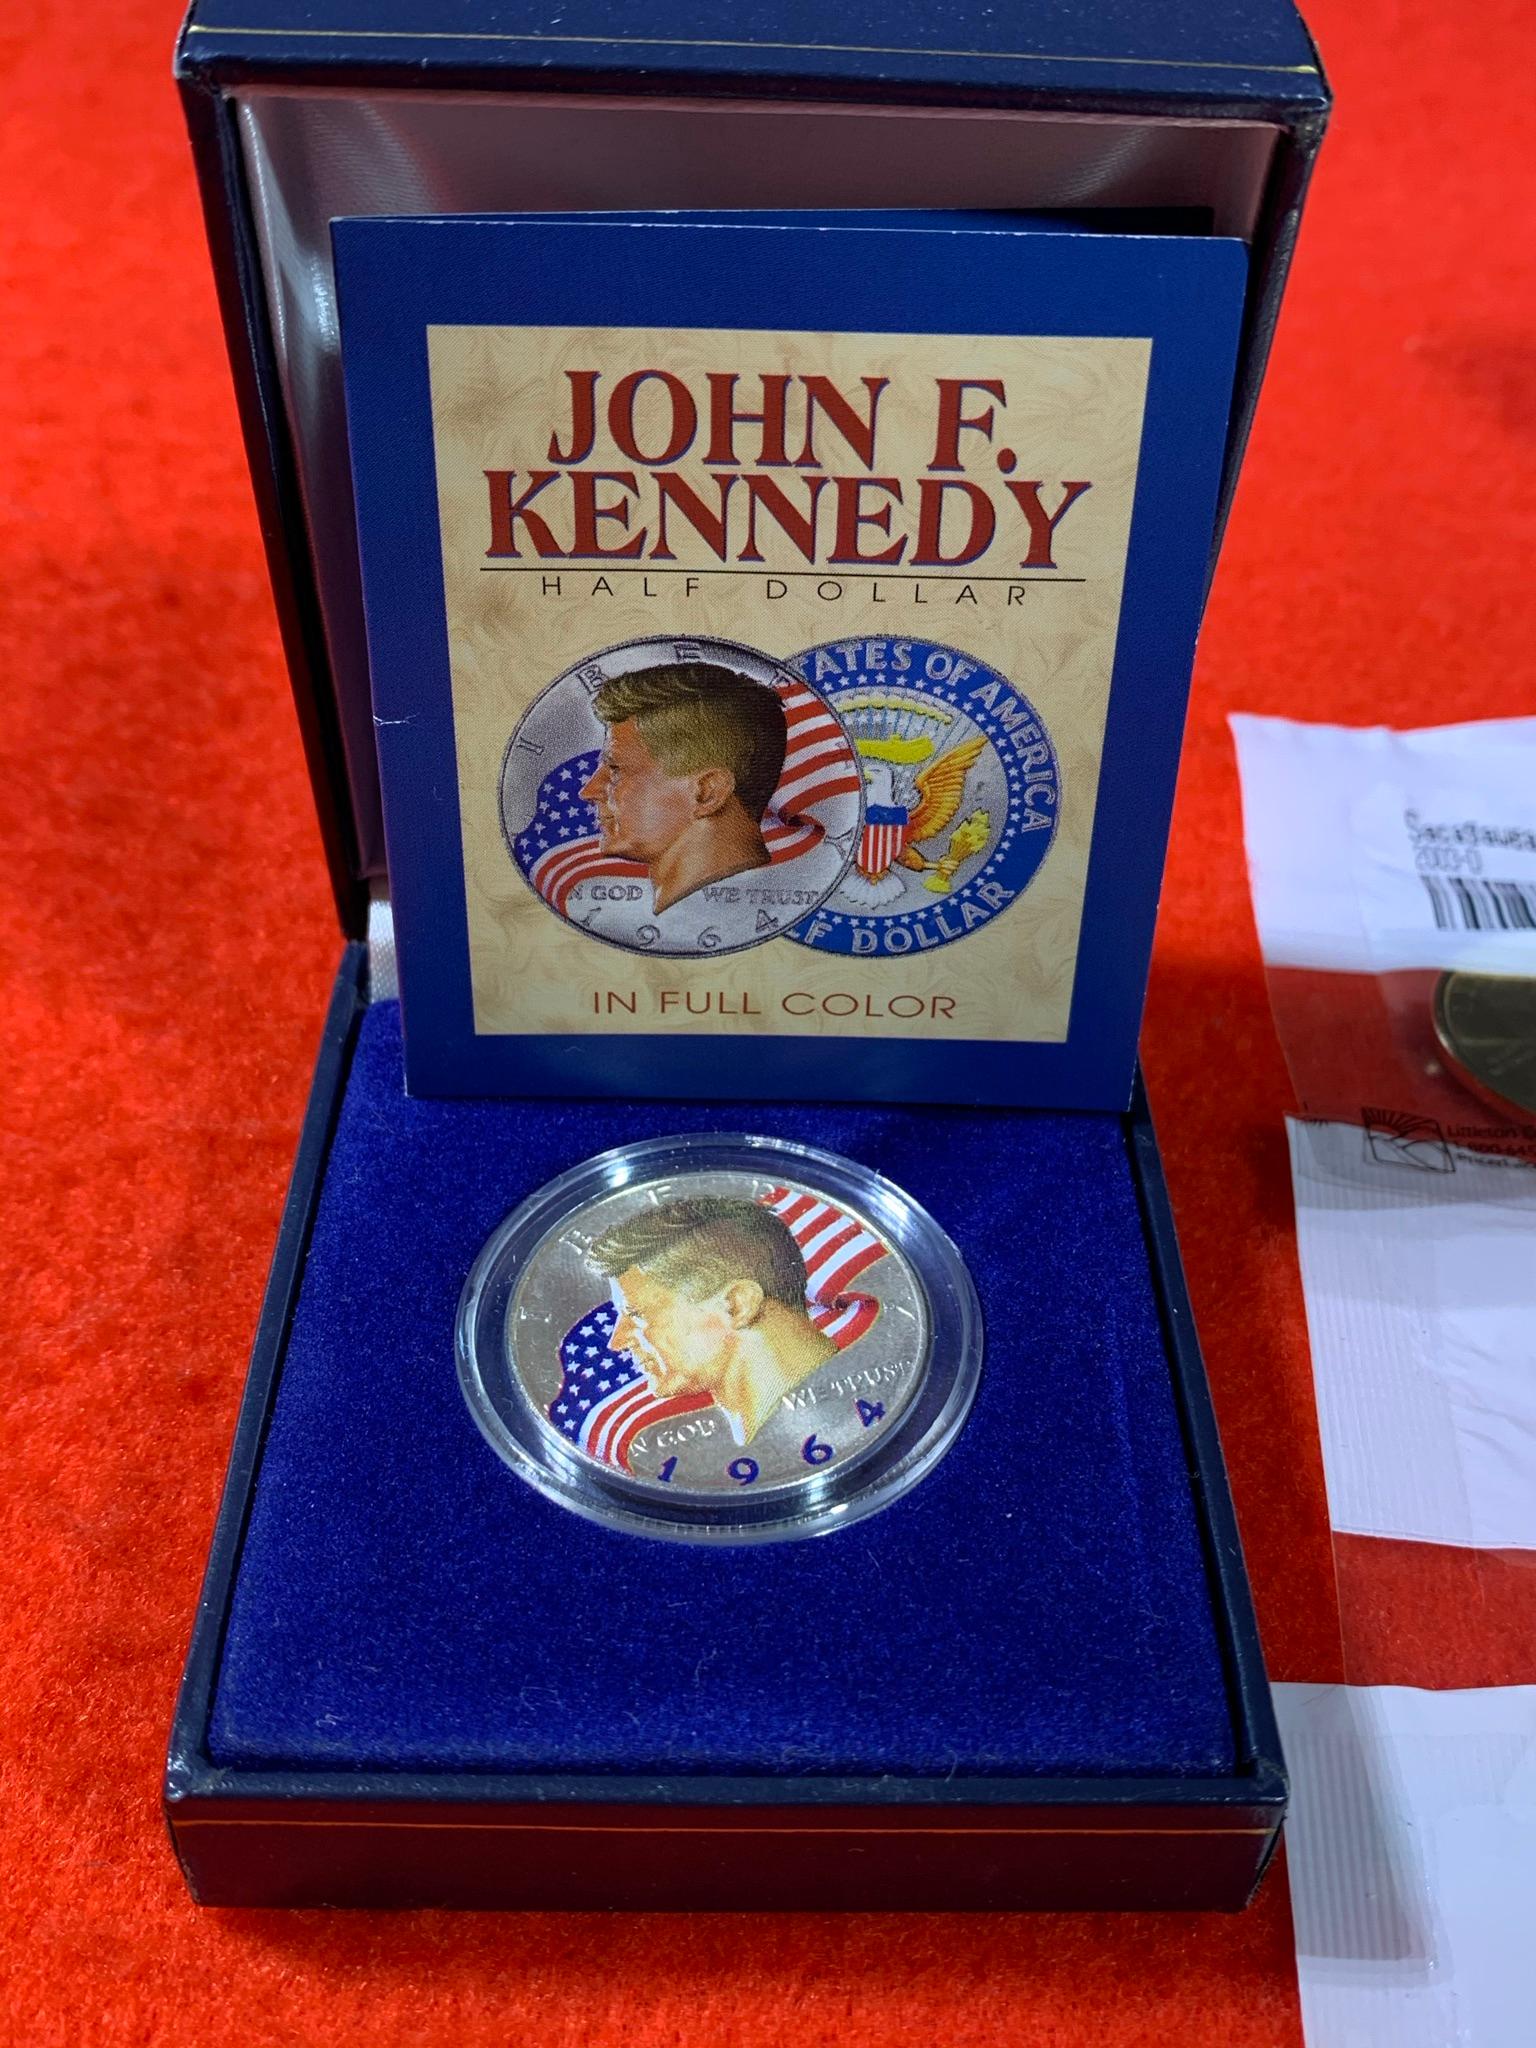 John F. Kennedy Full Color Half Dollar, Commemorative Coins & Uncirculated Coins